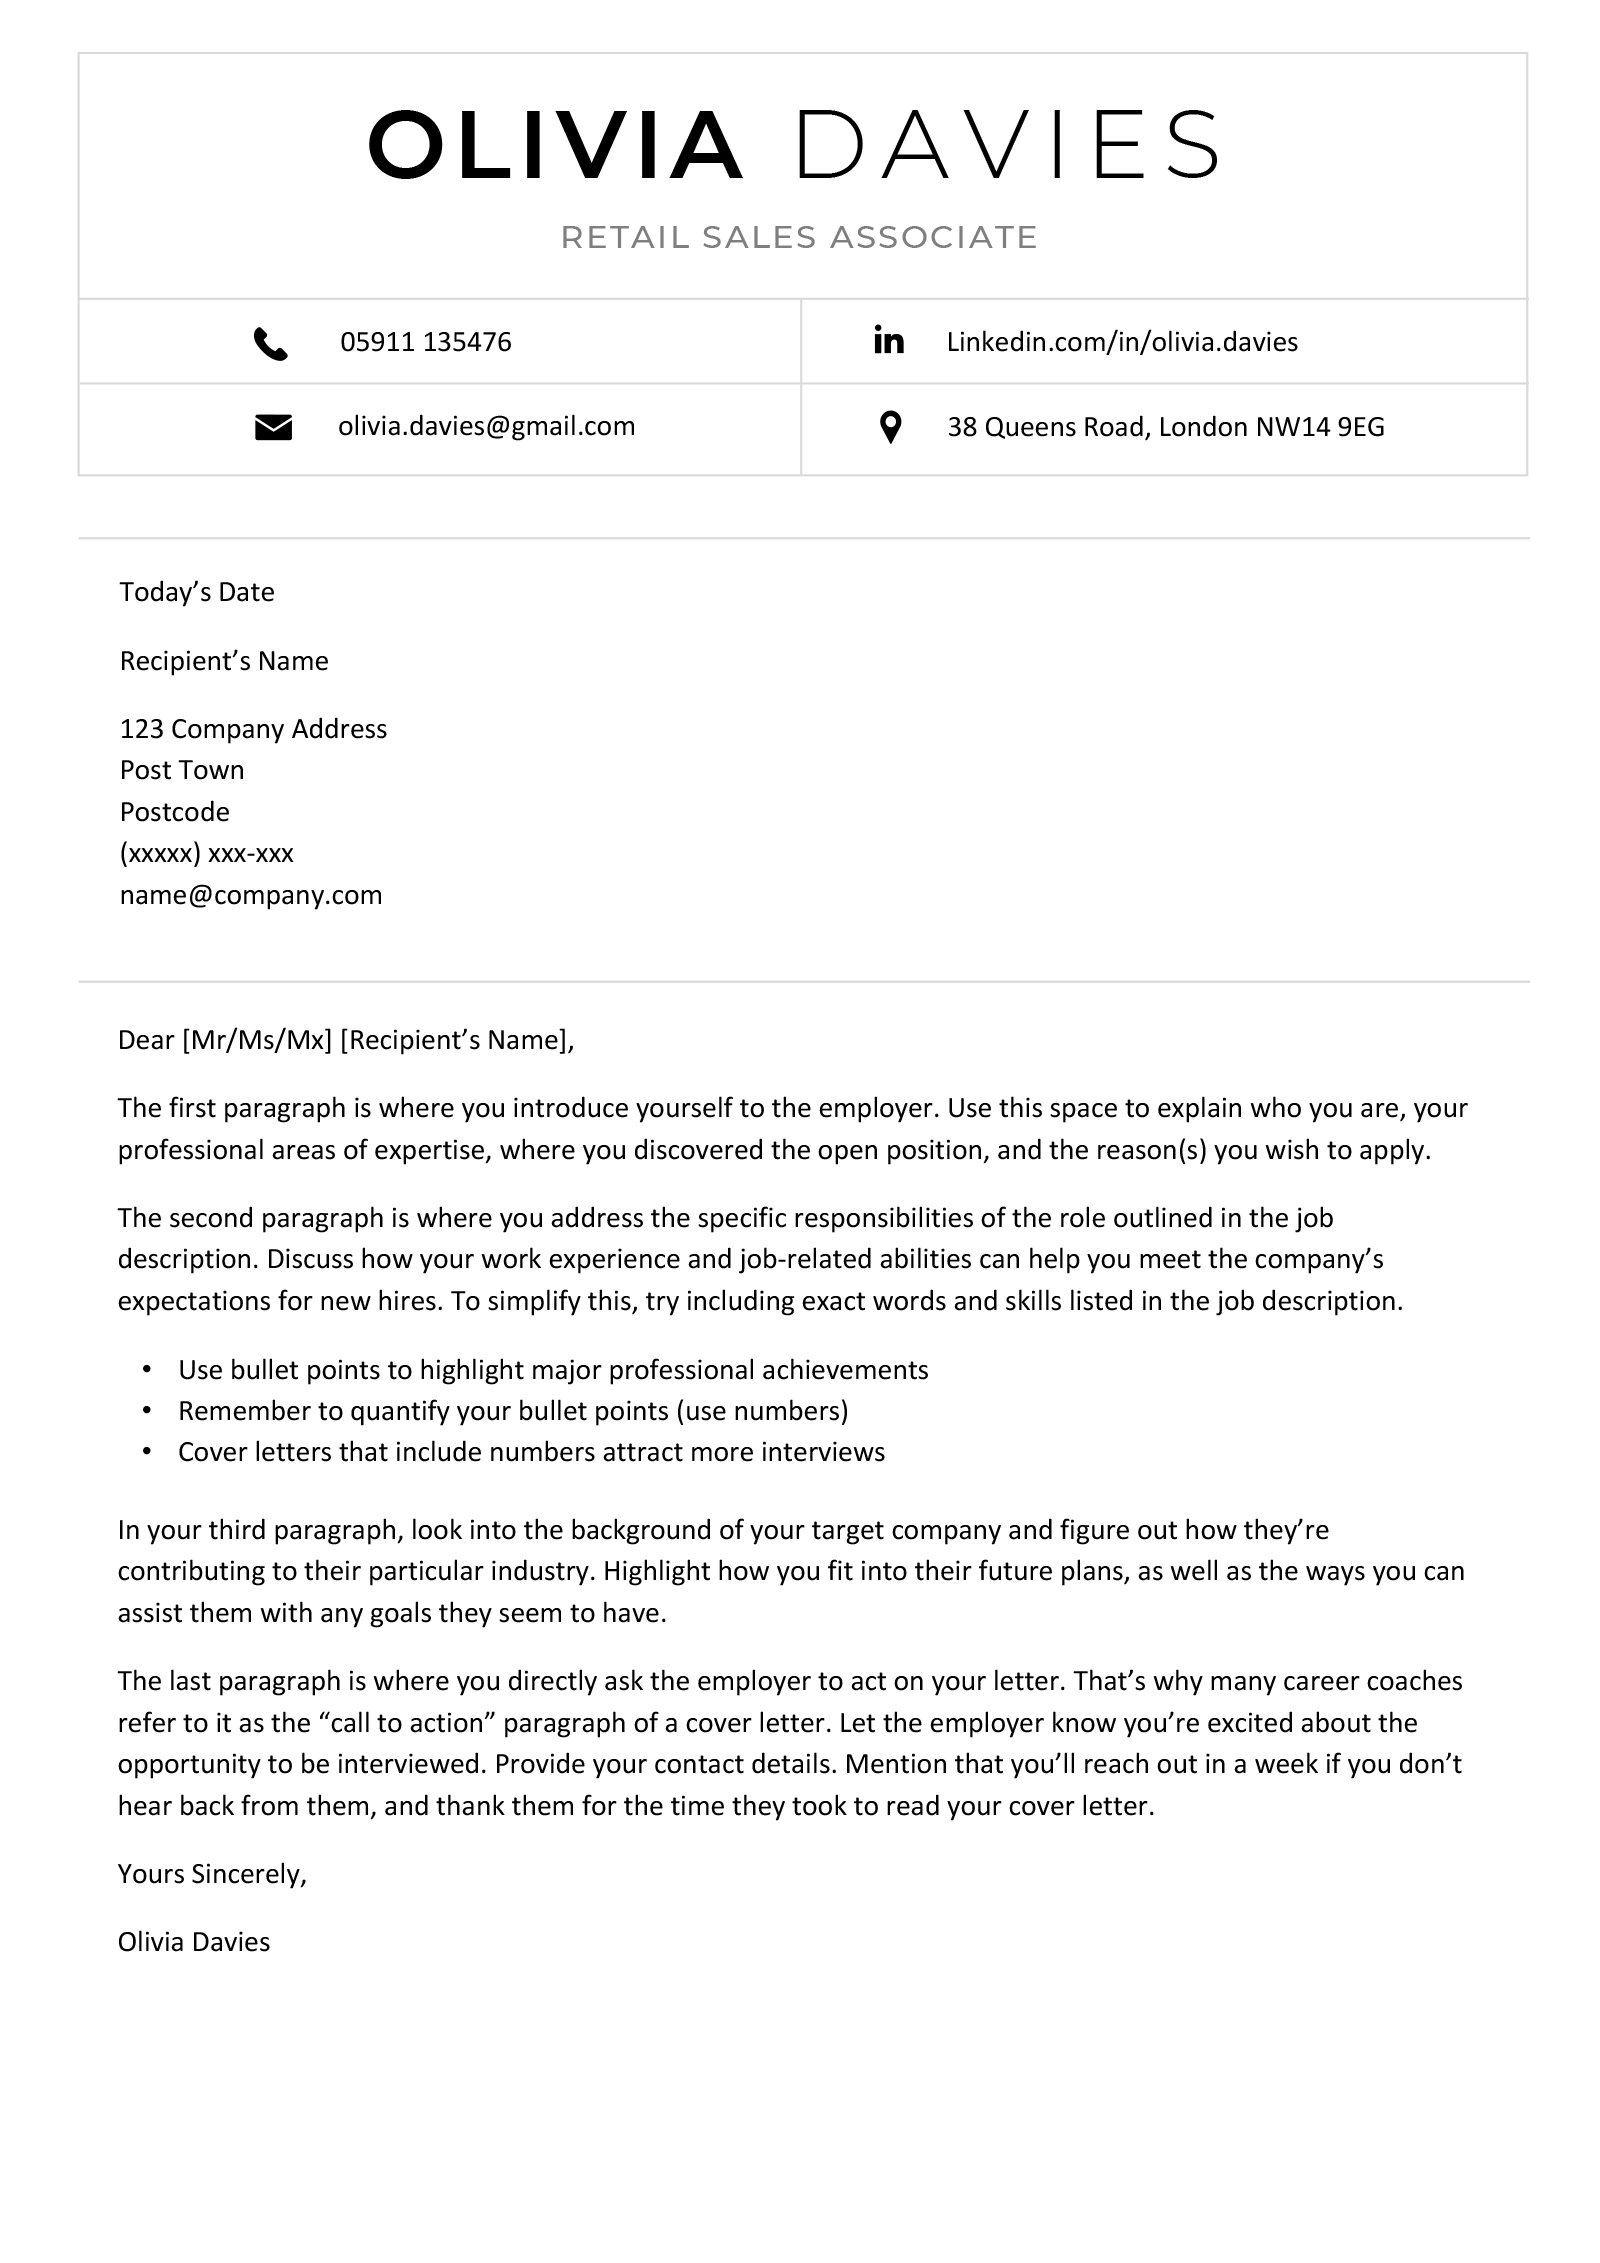 covering letter template uk 2020